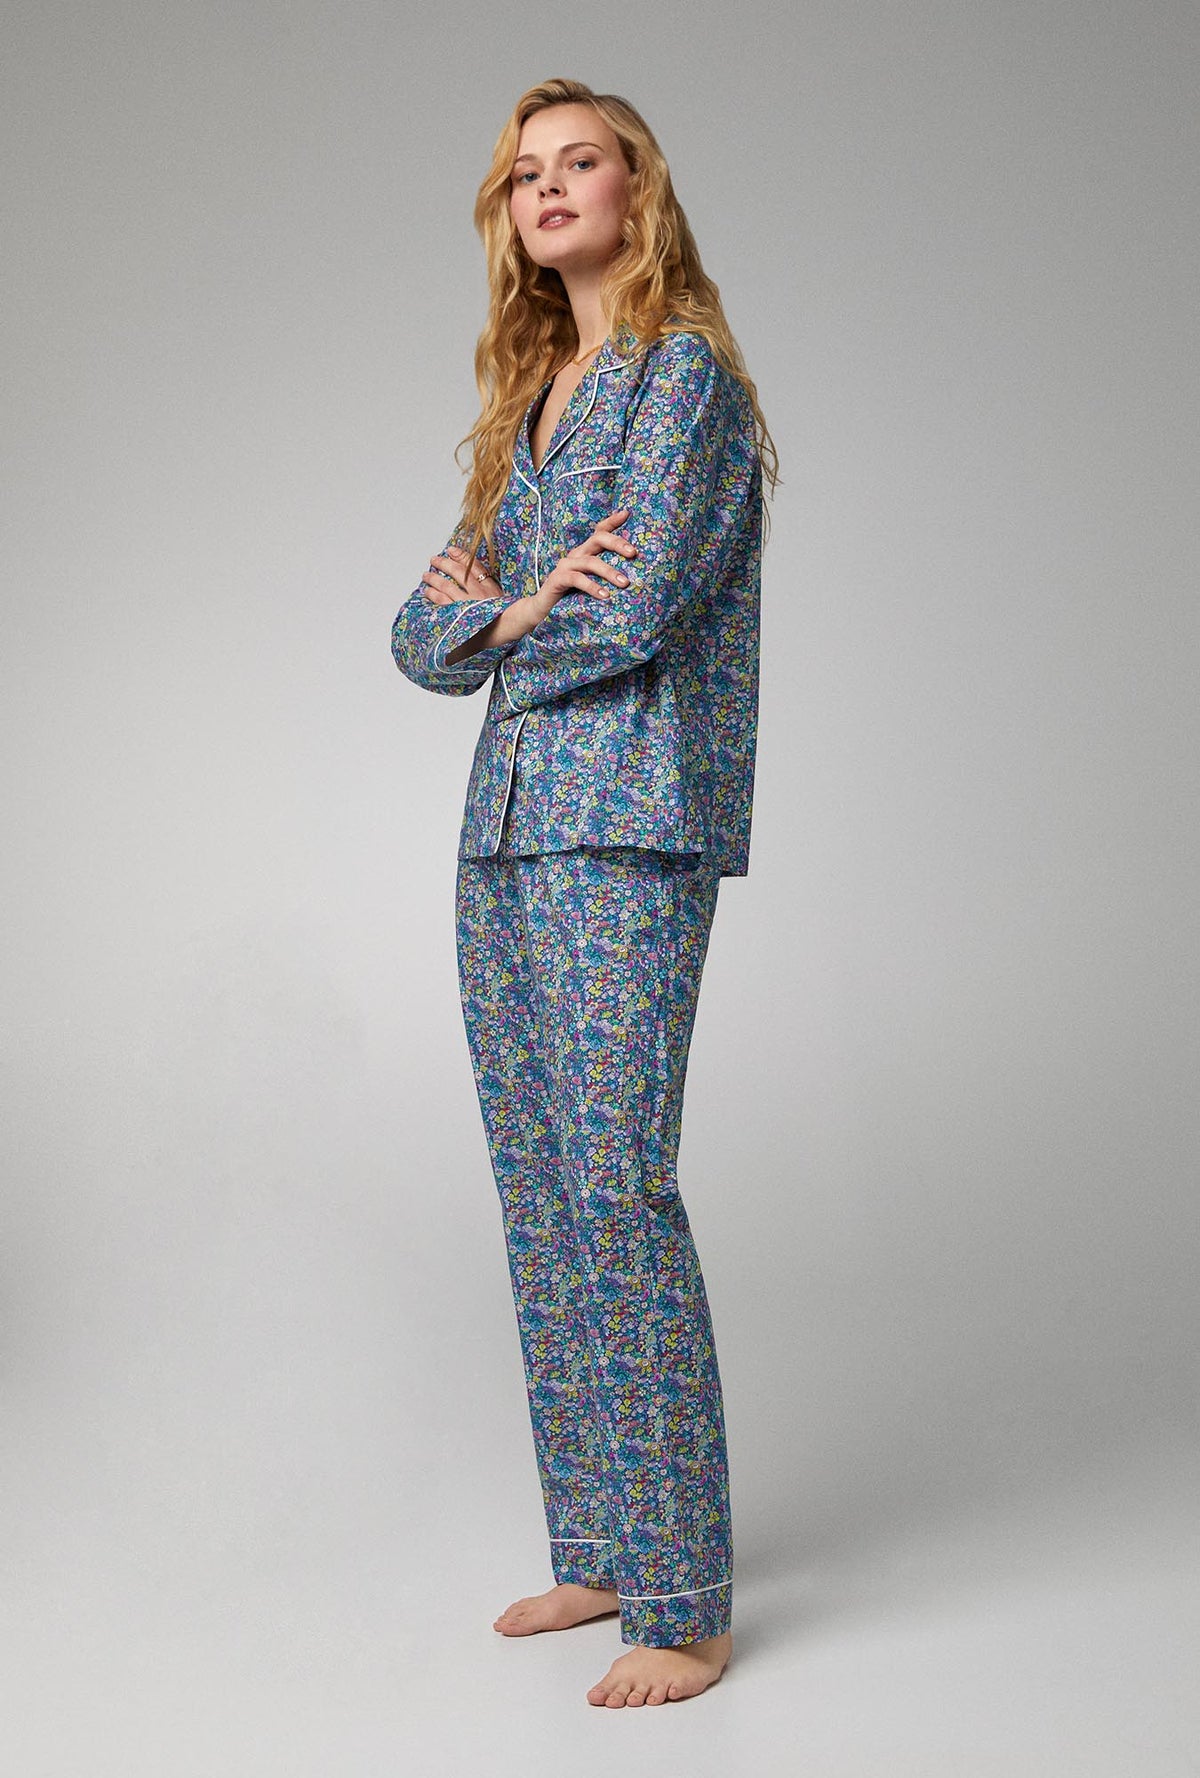 A lady wearing long sleeve classic cotton pj set with classic garden print